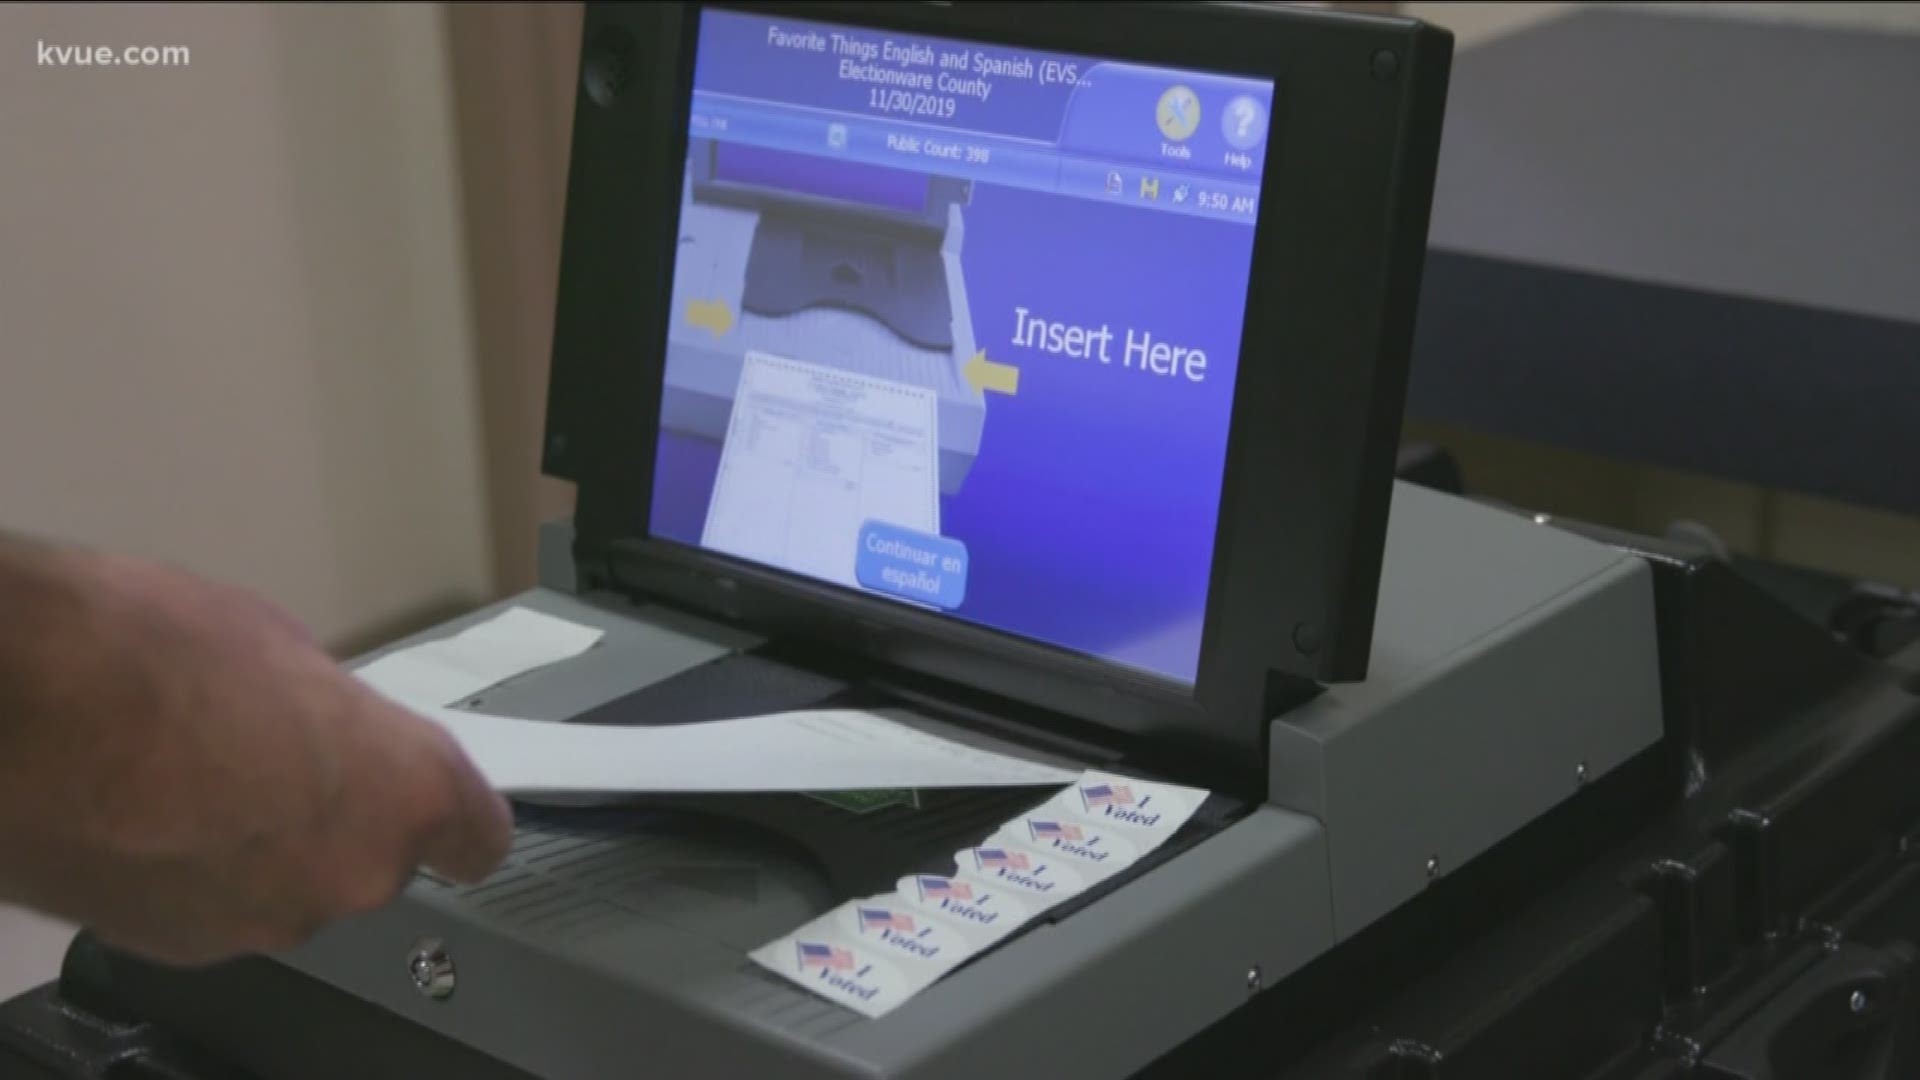 The county is using new machines that cast votes electronically but also leave a paper trail for verification.